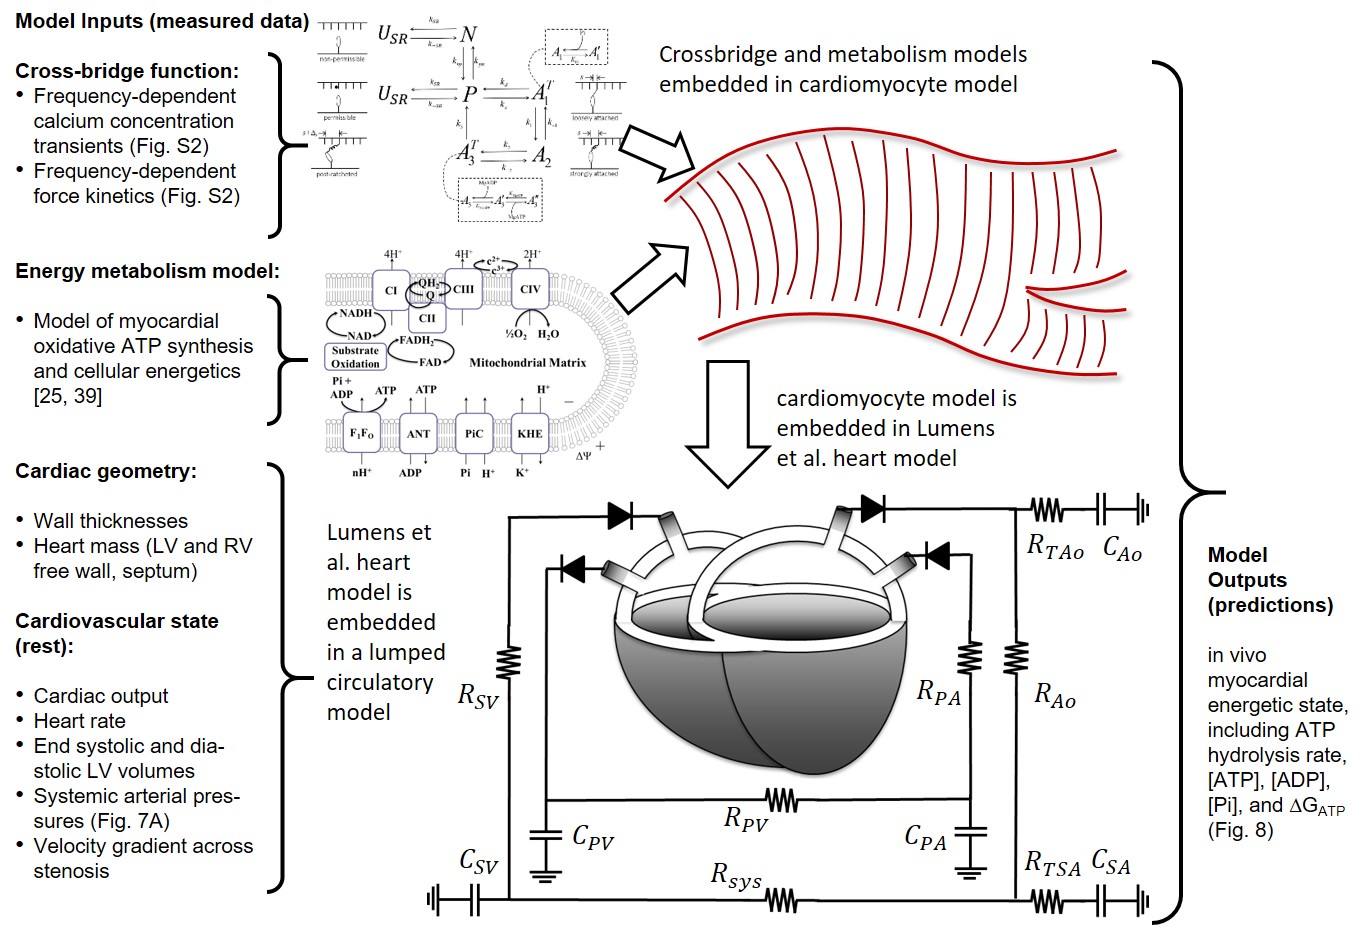 Multi-scale modeling of myocardial mechano-energetic function. The model integrates previously developed and validated models of cardiomyocyte dynamics , myocardial energetics , whole-organ cardiac mechanics  and a simple lumped parameter closed-loop circulatory system representing the systemic and pulmonary circuits. Data from multiple experimental modalities are used to identify model components for each individual animal in this study. The model predicts variables representing the in vivo myocardial energetic state, including ATP hydrolysis rate, [ATP], [ADP], [Pi], and the free energy of ATP hydrolysis DGATP in the LV myocardium for each individual animal. Figure reproduced from .